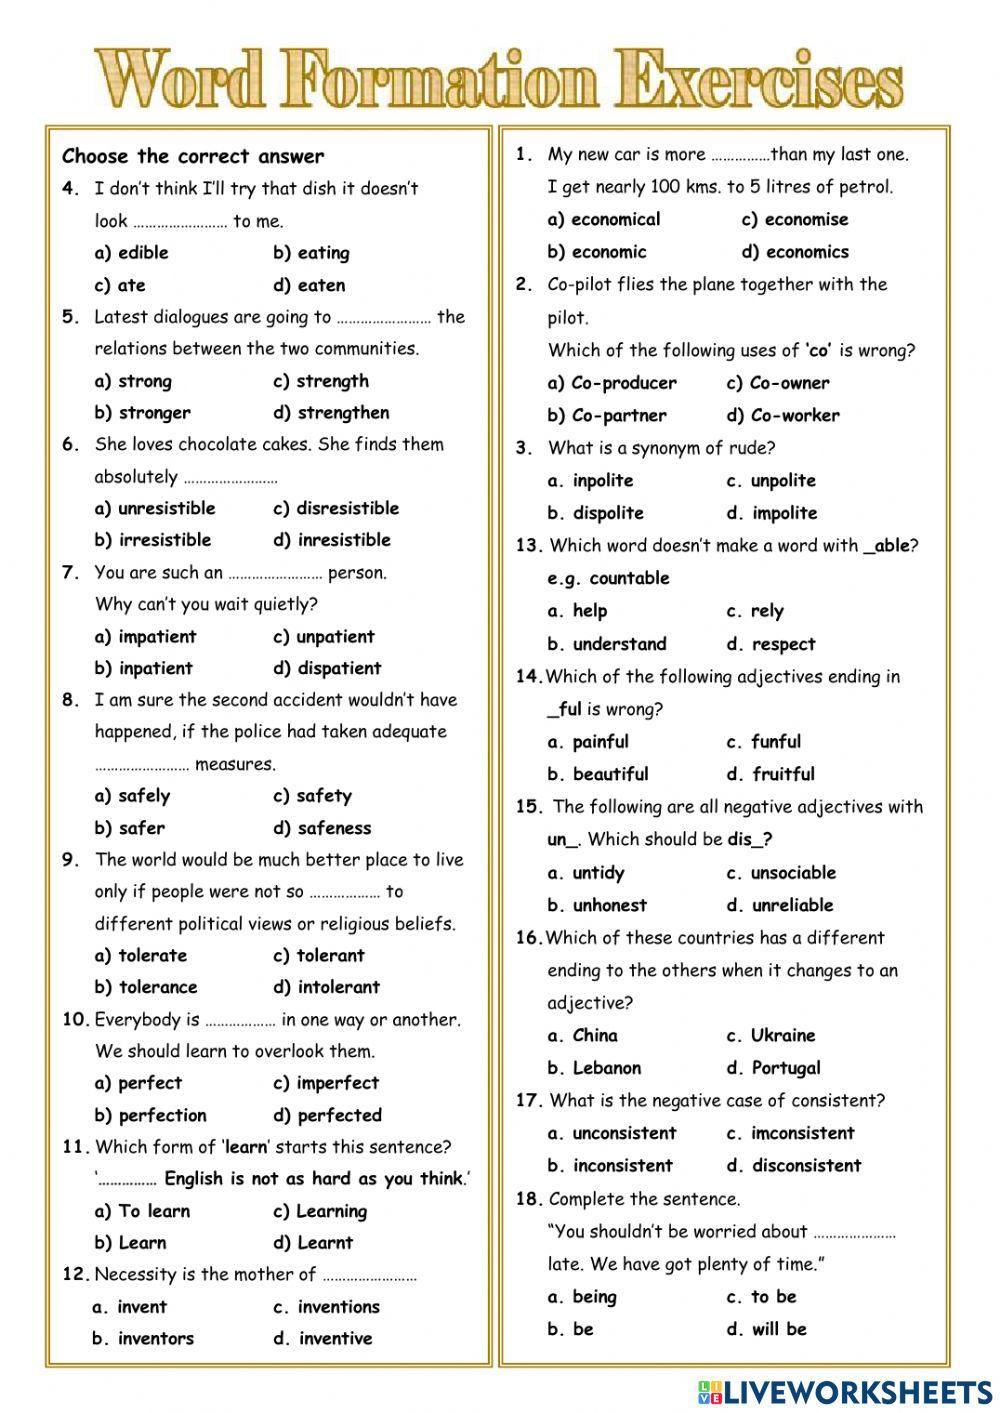 Word Formation-1 (Multiple Choice)